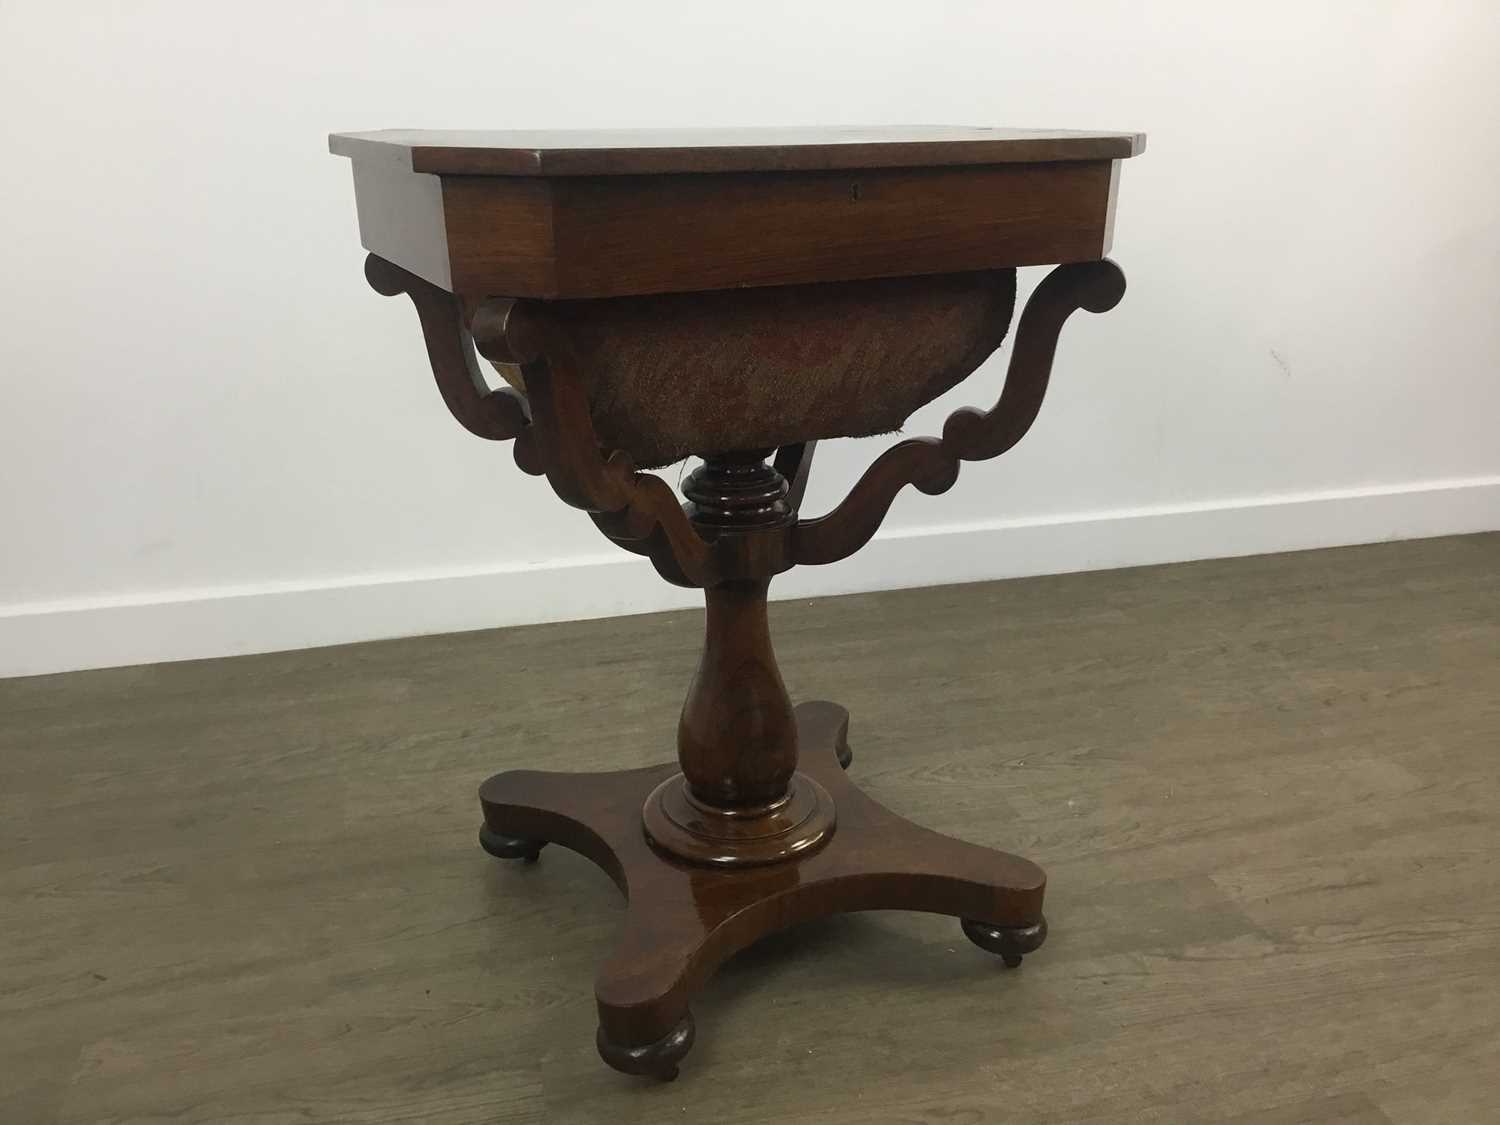 VICTORIAN ROSEWOOD SEWING TABLE, MID-19TH CENTURY